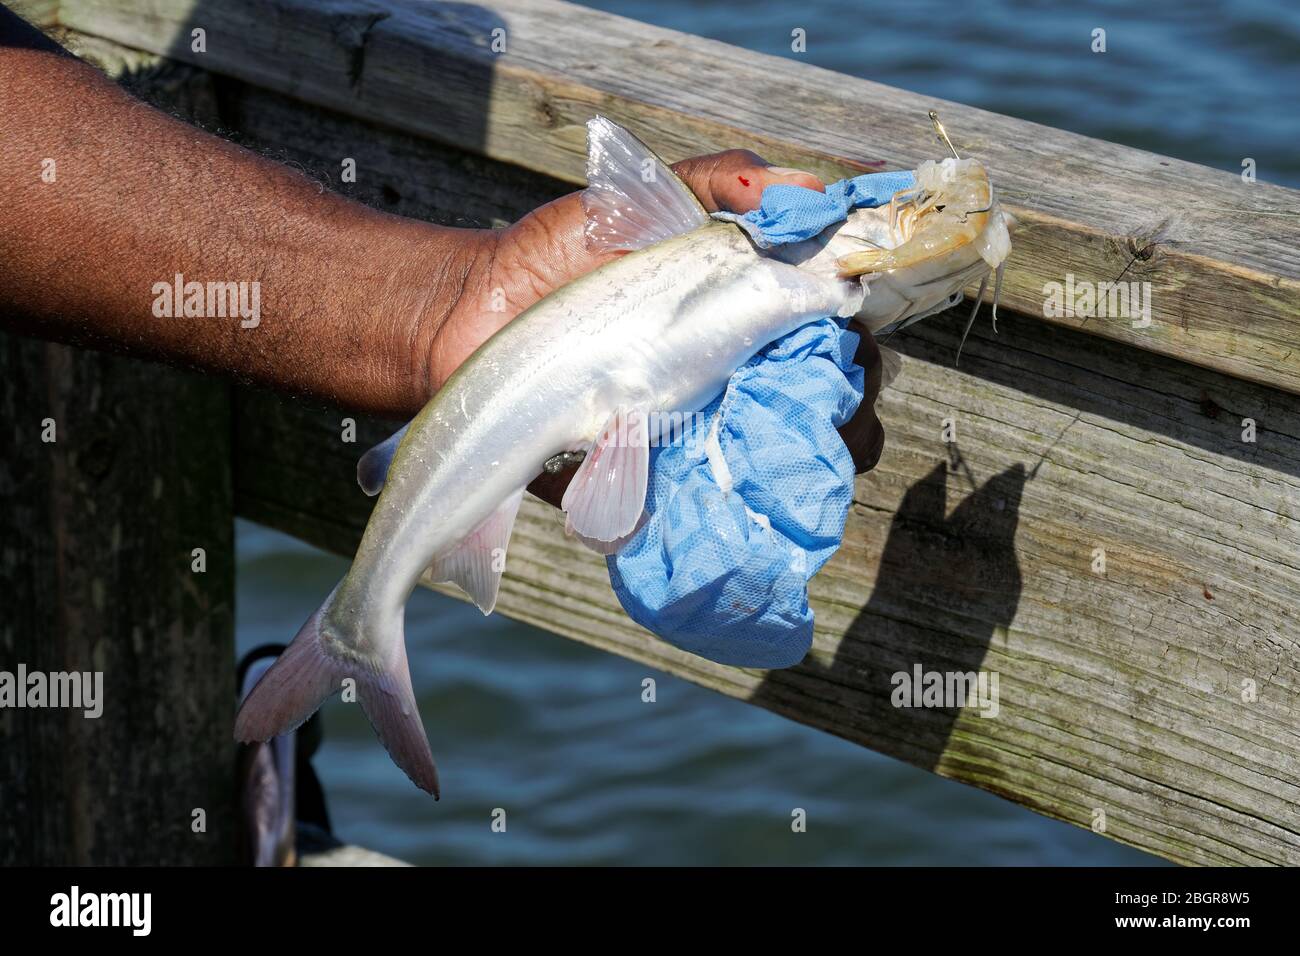 Great Care Is Taken In Handling A Freshly Caught Hardhead Catfish Ariopsis Felis As Its Dorsal And Pectoral Fins Are Razor Sharp And Venomous Stock Photo Alamy